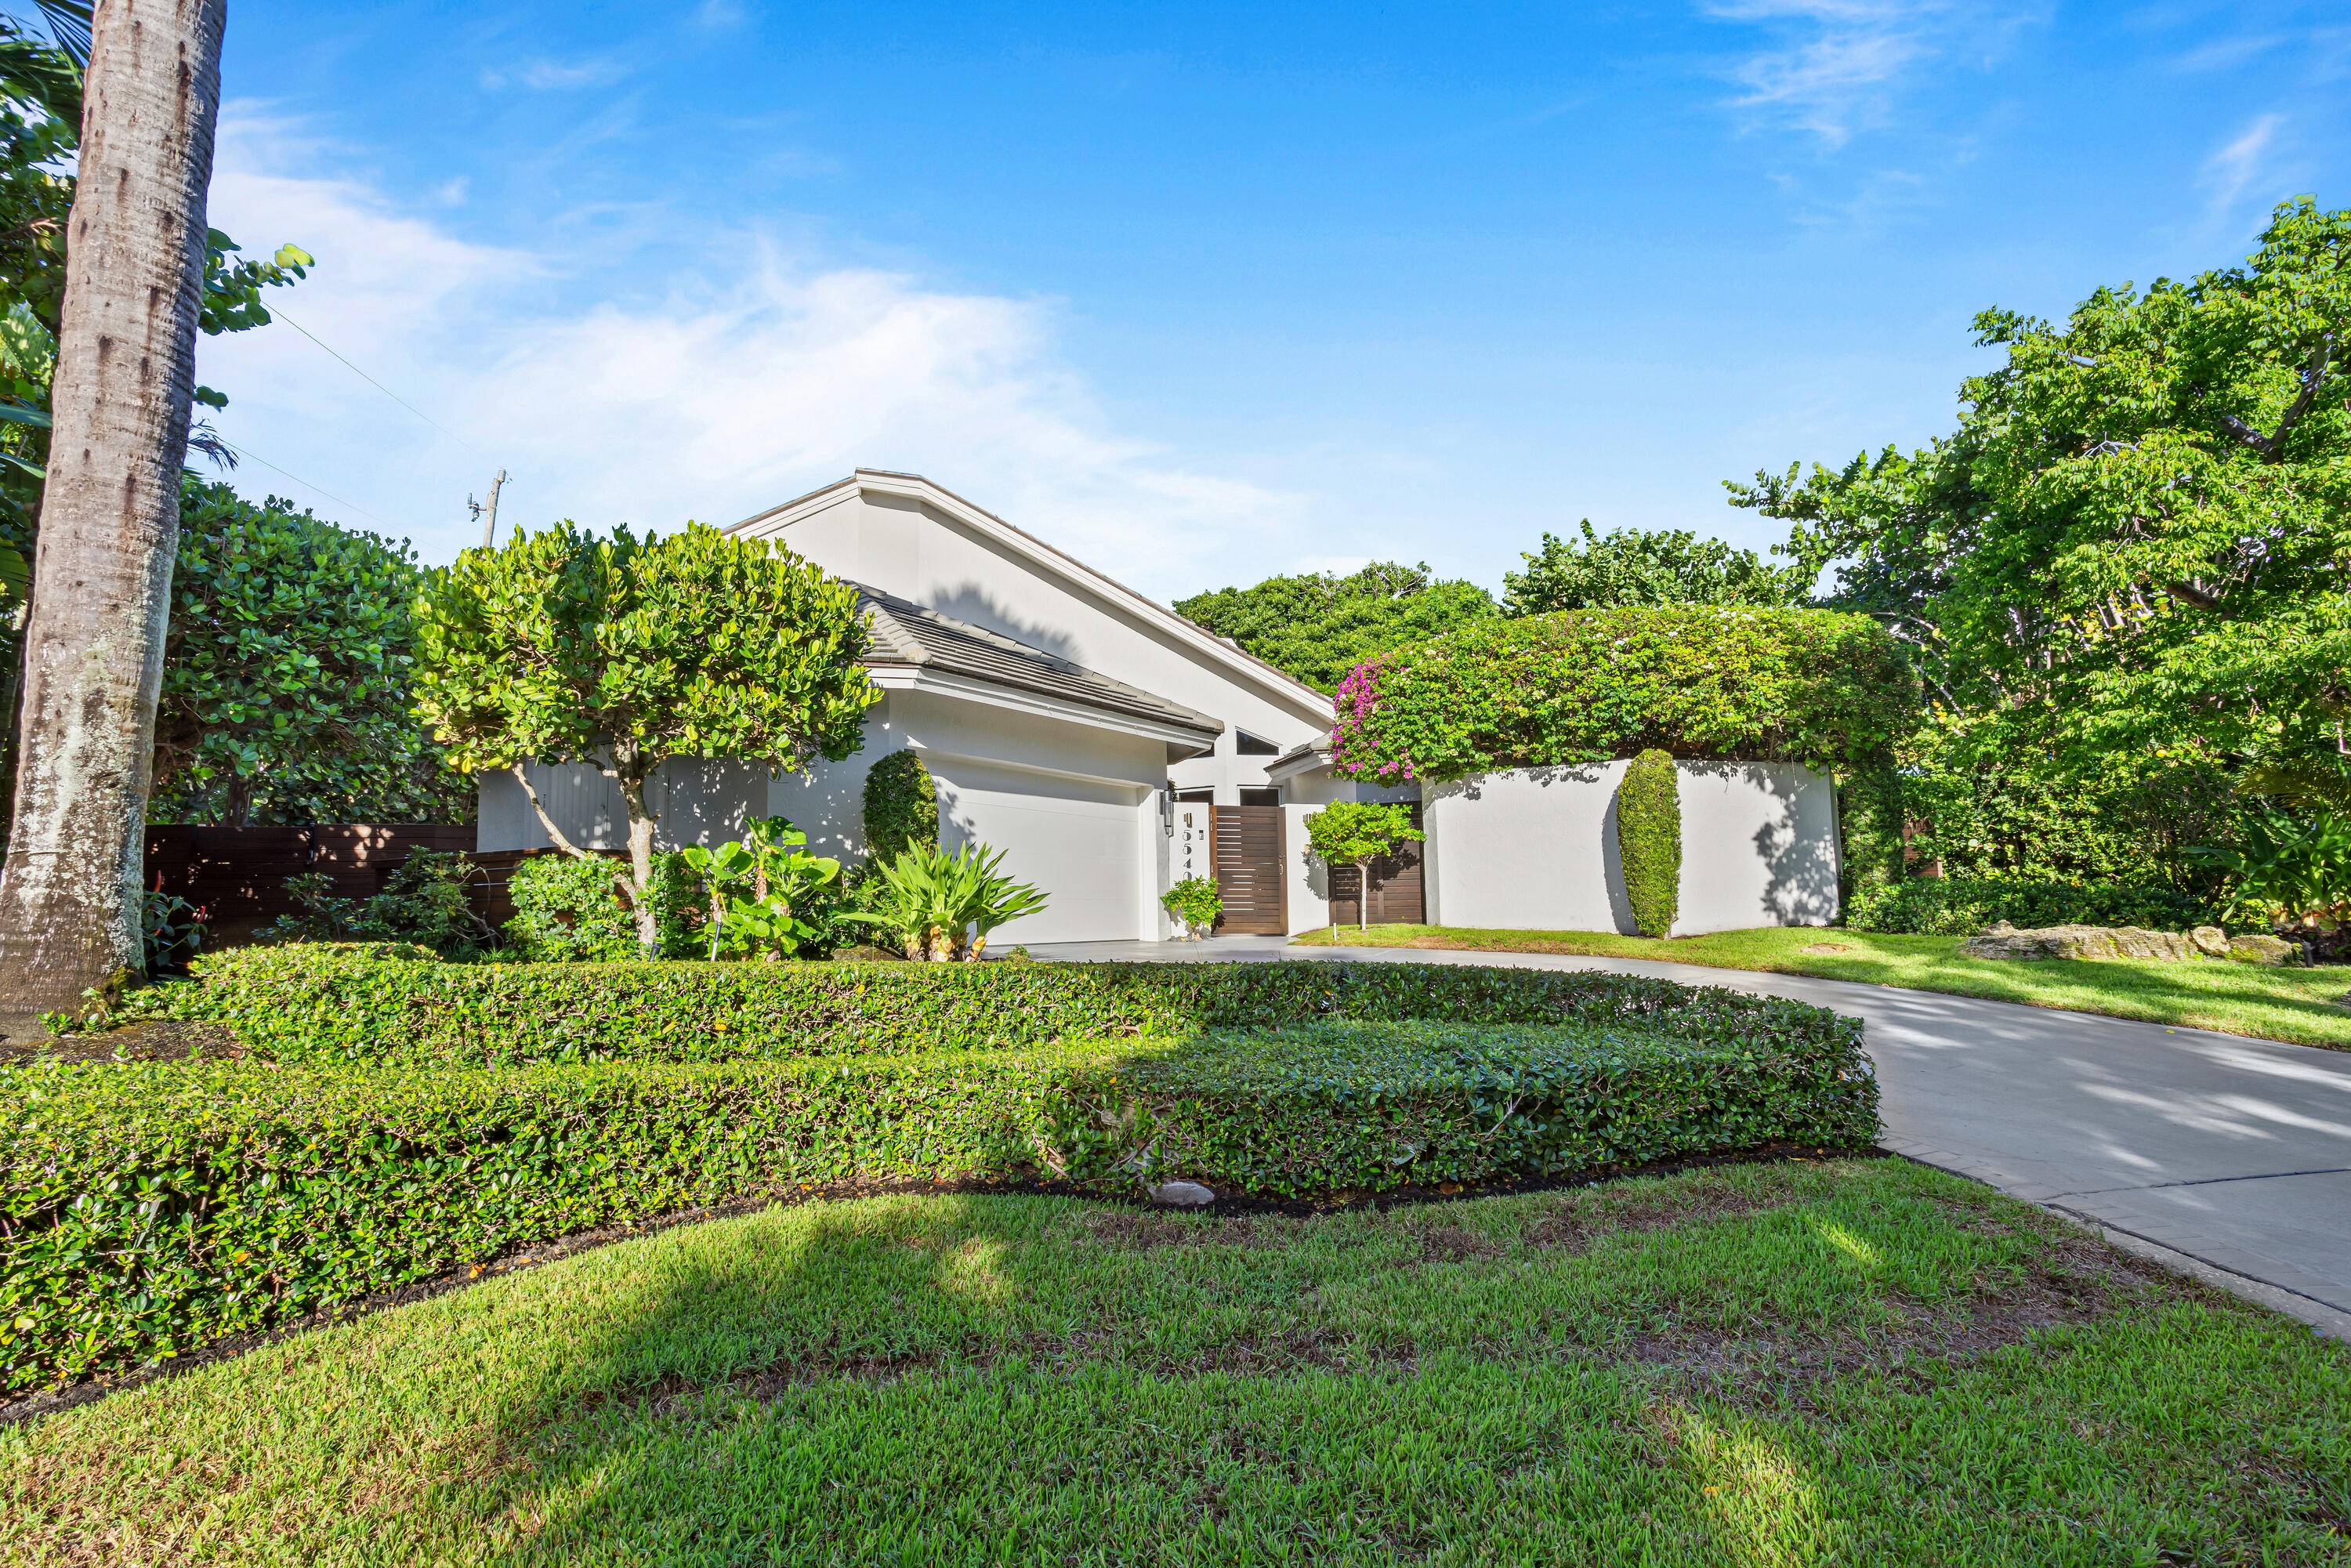 Lushly landscaped beach area four bedroom estate in prestigious Ocean Ridge is beautifully detailed with a modern vibe, a touch of Zen, and a sense of drama.